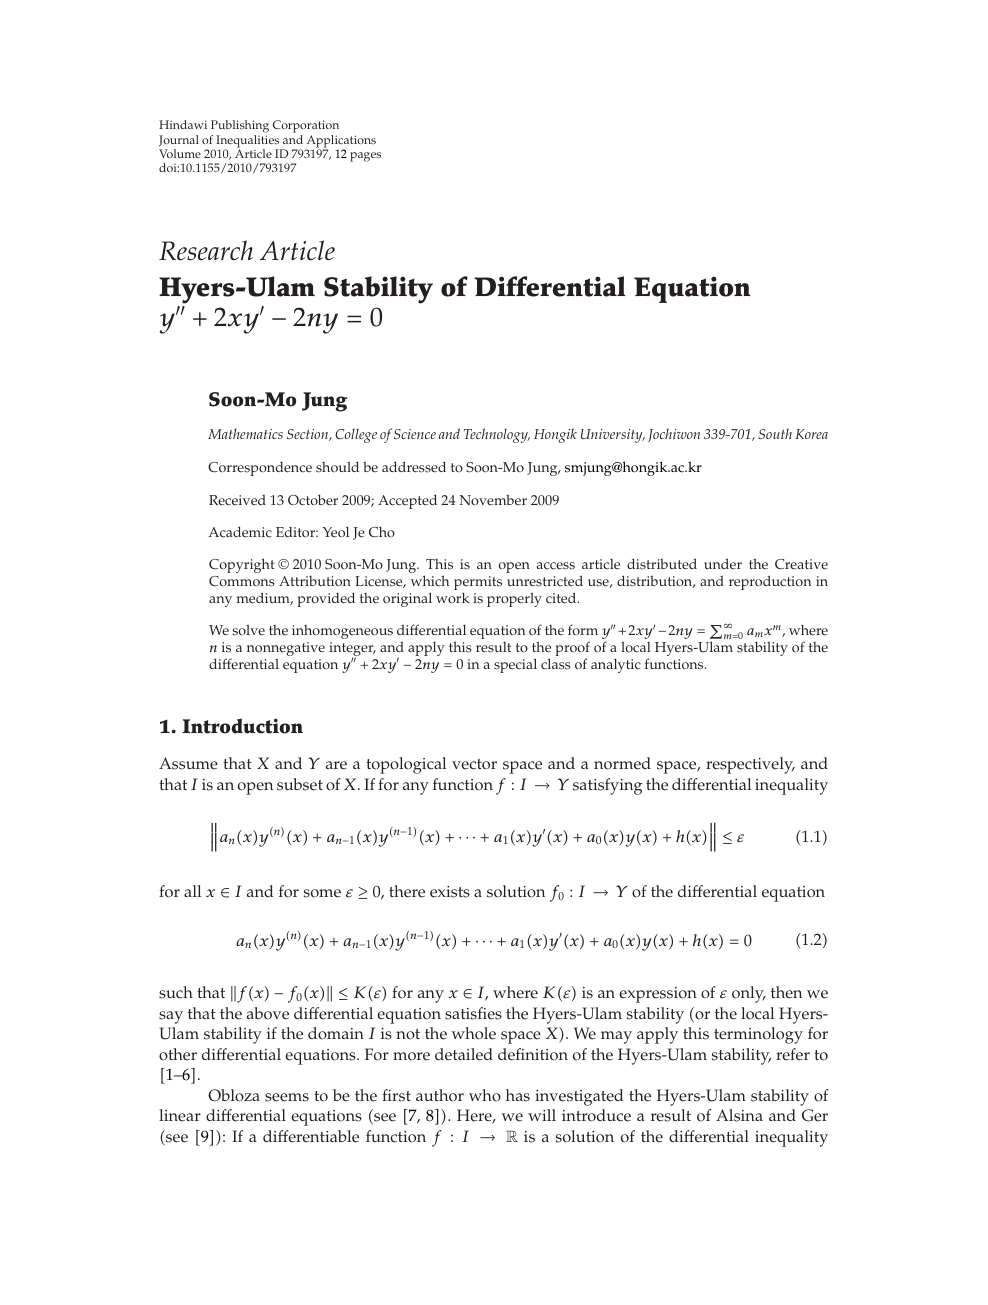 Hyers Ulam Stability Of Differential Equation Y 2xy 2ny 0 Topic Of Research Paper In Mathematics Download Scholarly Article Pdf And Read For Free On Cyberleninka Open Science Hub